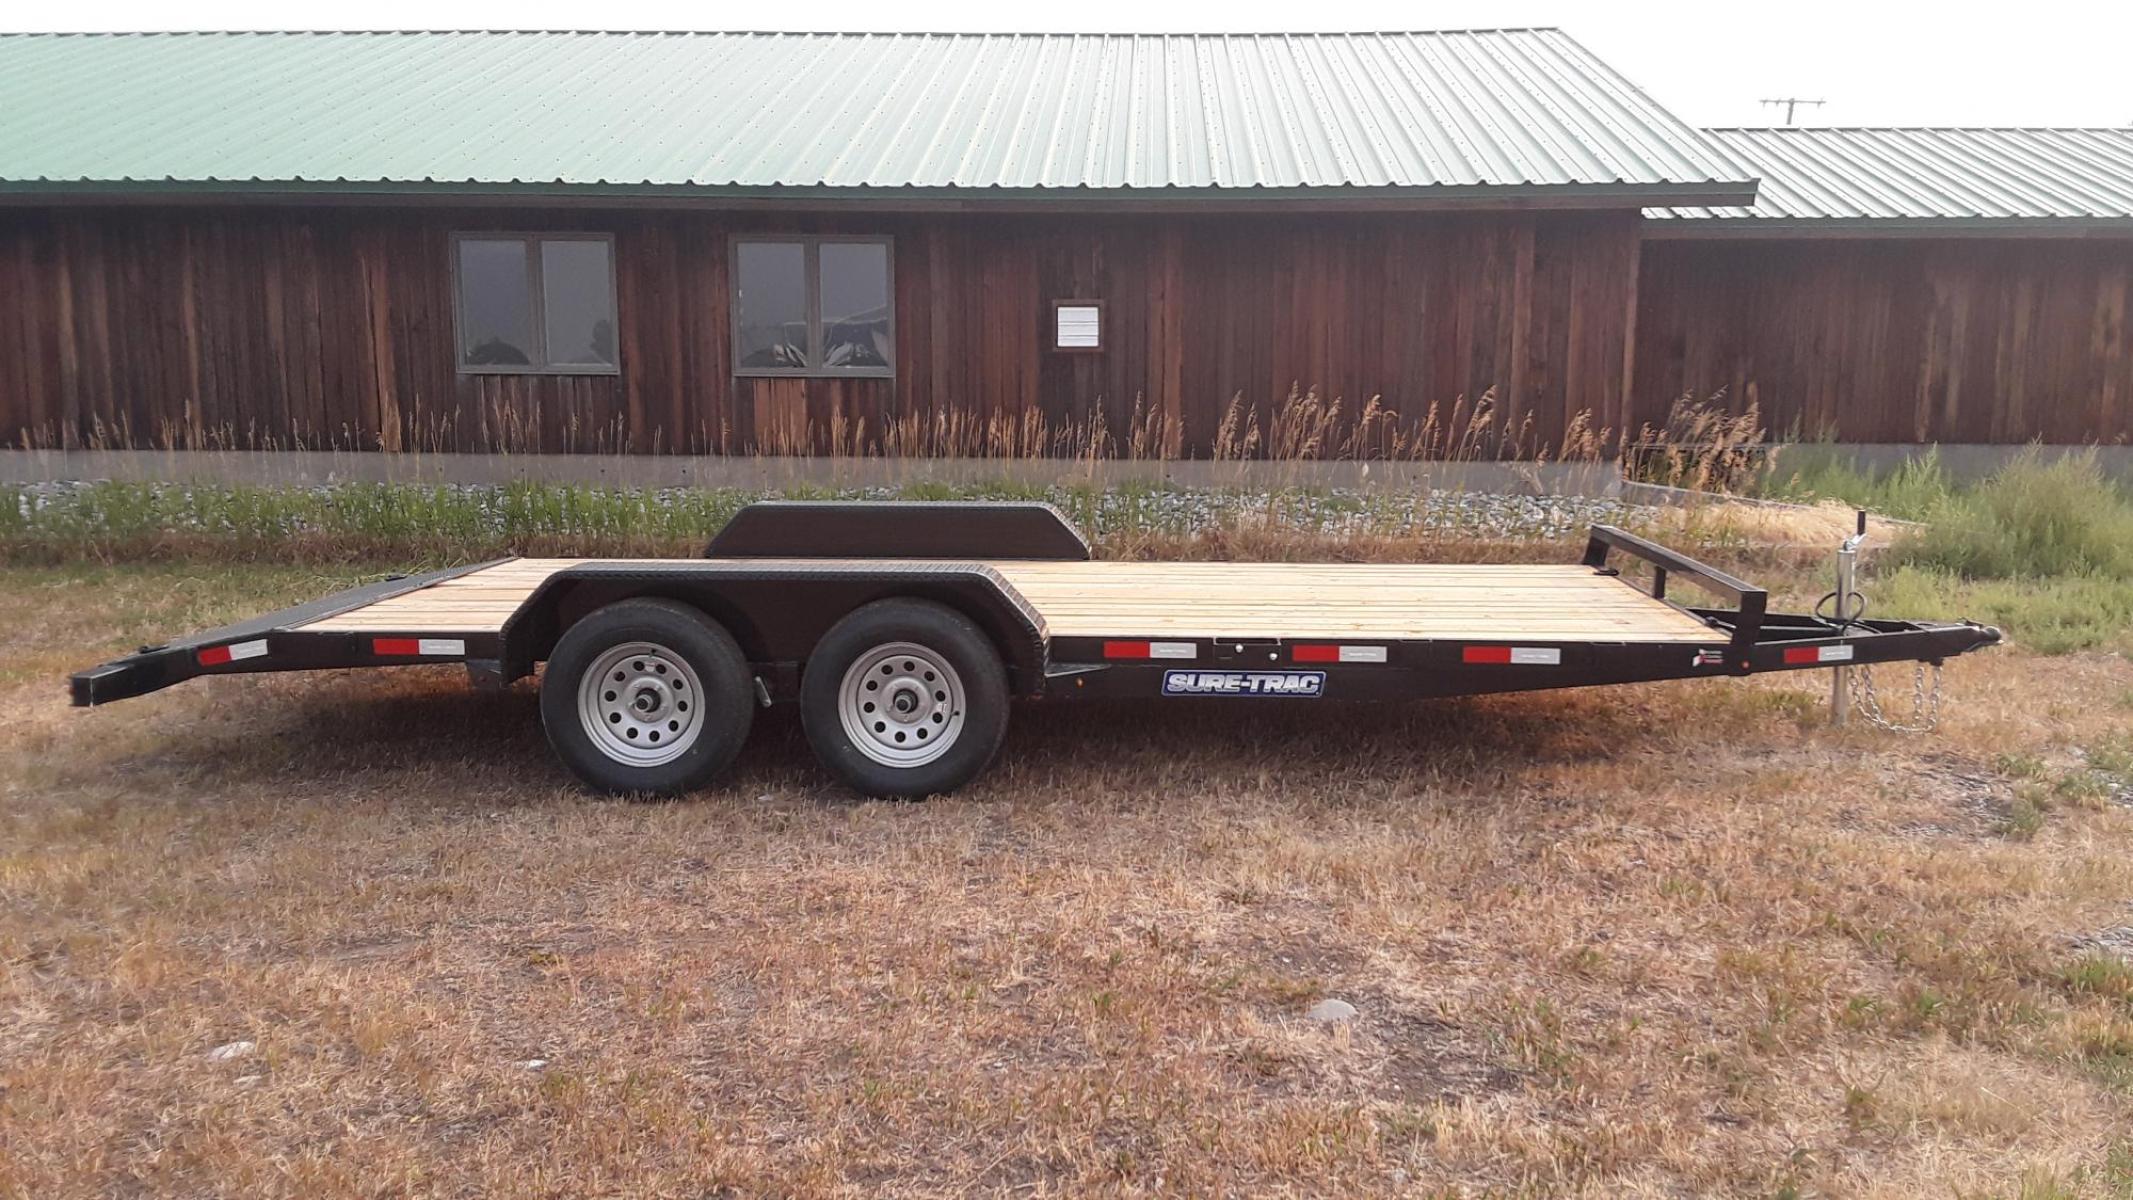 2022 Black SureTrac 7 x 18 - 7K Car Hauler , located at 310 West 1st Ave, Big Timber, MT, 59011, (406) 860-8510, 45.833511, -109.957809 - SURE-TRAC 7 X 18 C-CHANNEL CAR HAULER, 7K GVW, ELECTRIC BRAKES BOTH AXLES, REAR STOW RAMPS, LED LIGHTS, TREATED WOOD DECK, POWDER COAT FINISH, REMOVABLE FENDER ON DRIVERS SIDE, (4) D-RING TIE DOWNS, STAKE POCKETS, 2' TREAD PLATE DOVETAIL, EZ LUBE HUBS, 15' RADIAL TIRES, SPRING SUSPENSION, SPARE MOUN - Photo #1